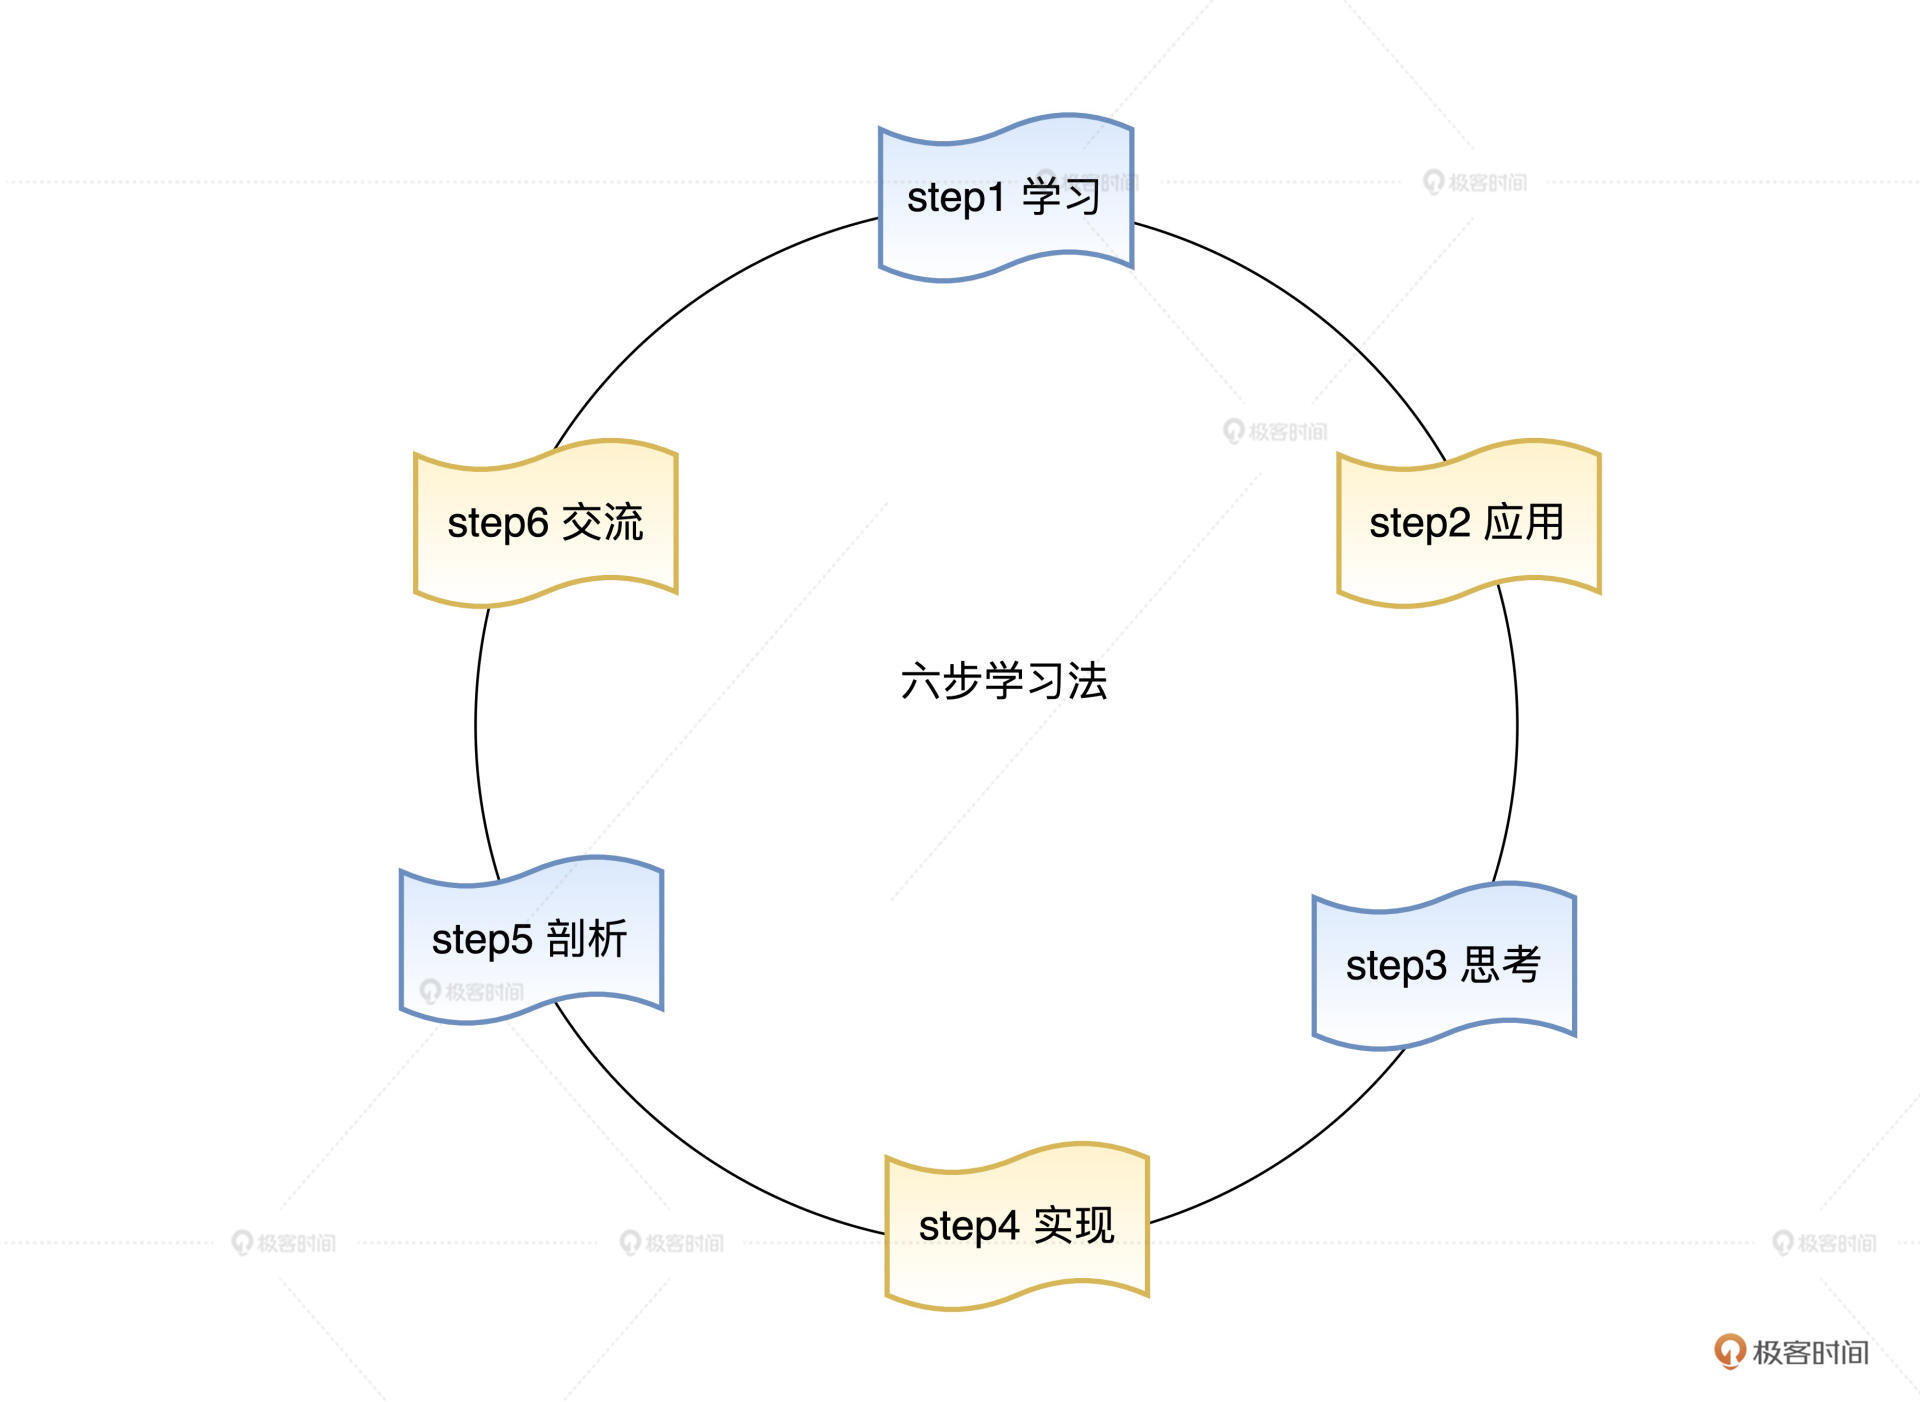 https://img.zhaoweiguo.com/knowledge/images/theorys/learnings/6steps.jpeg